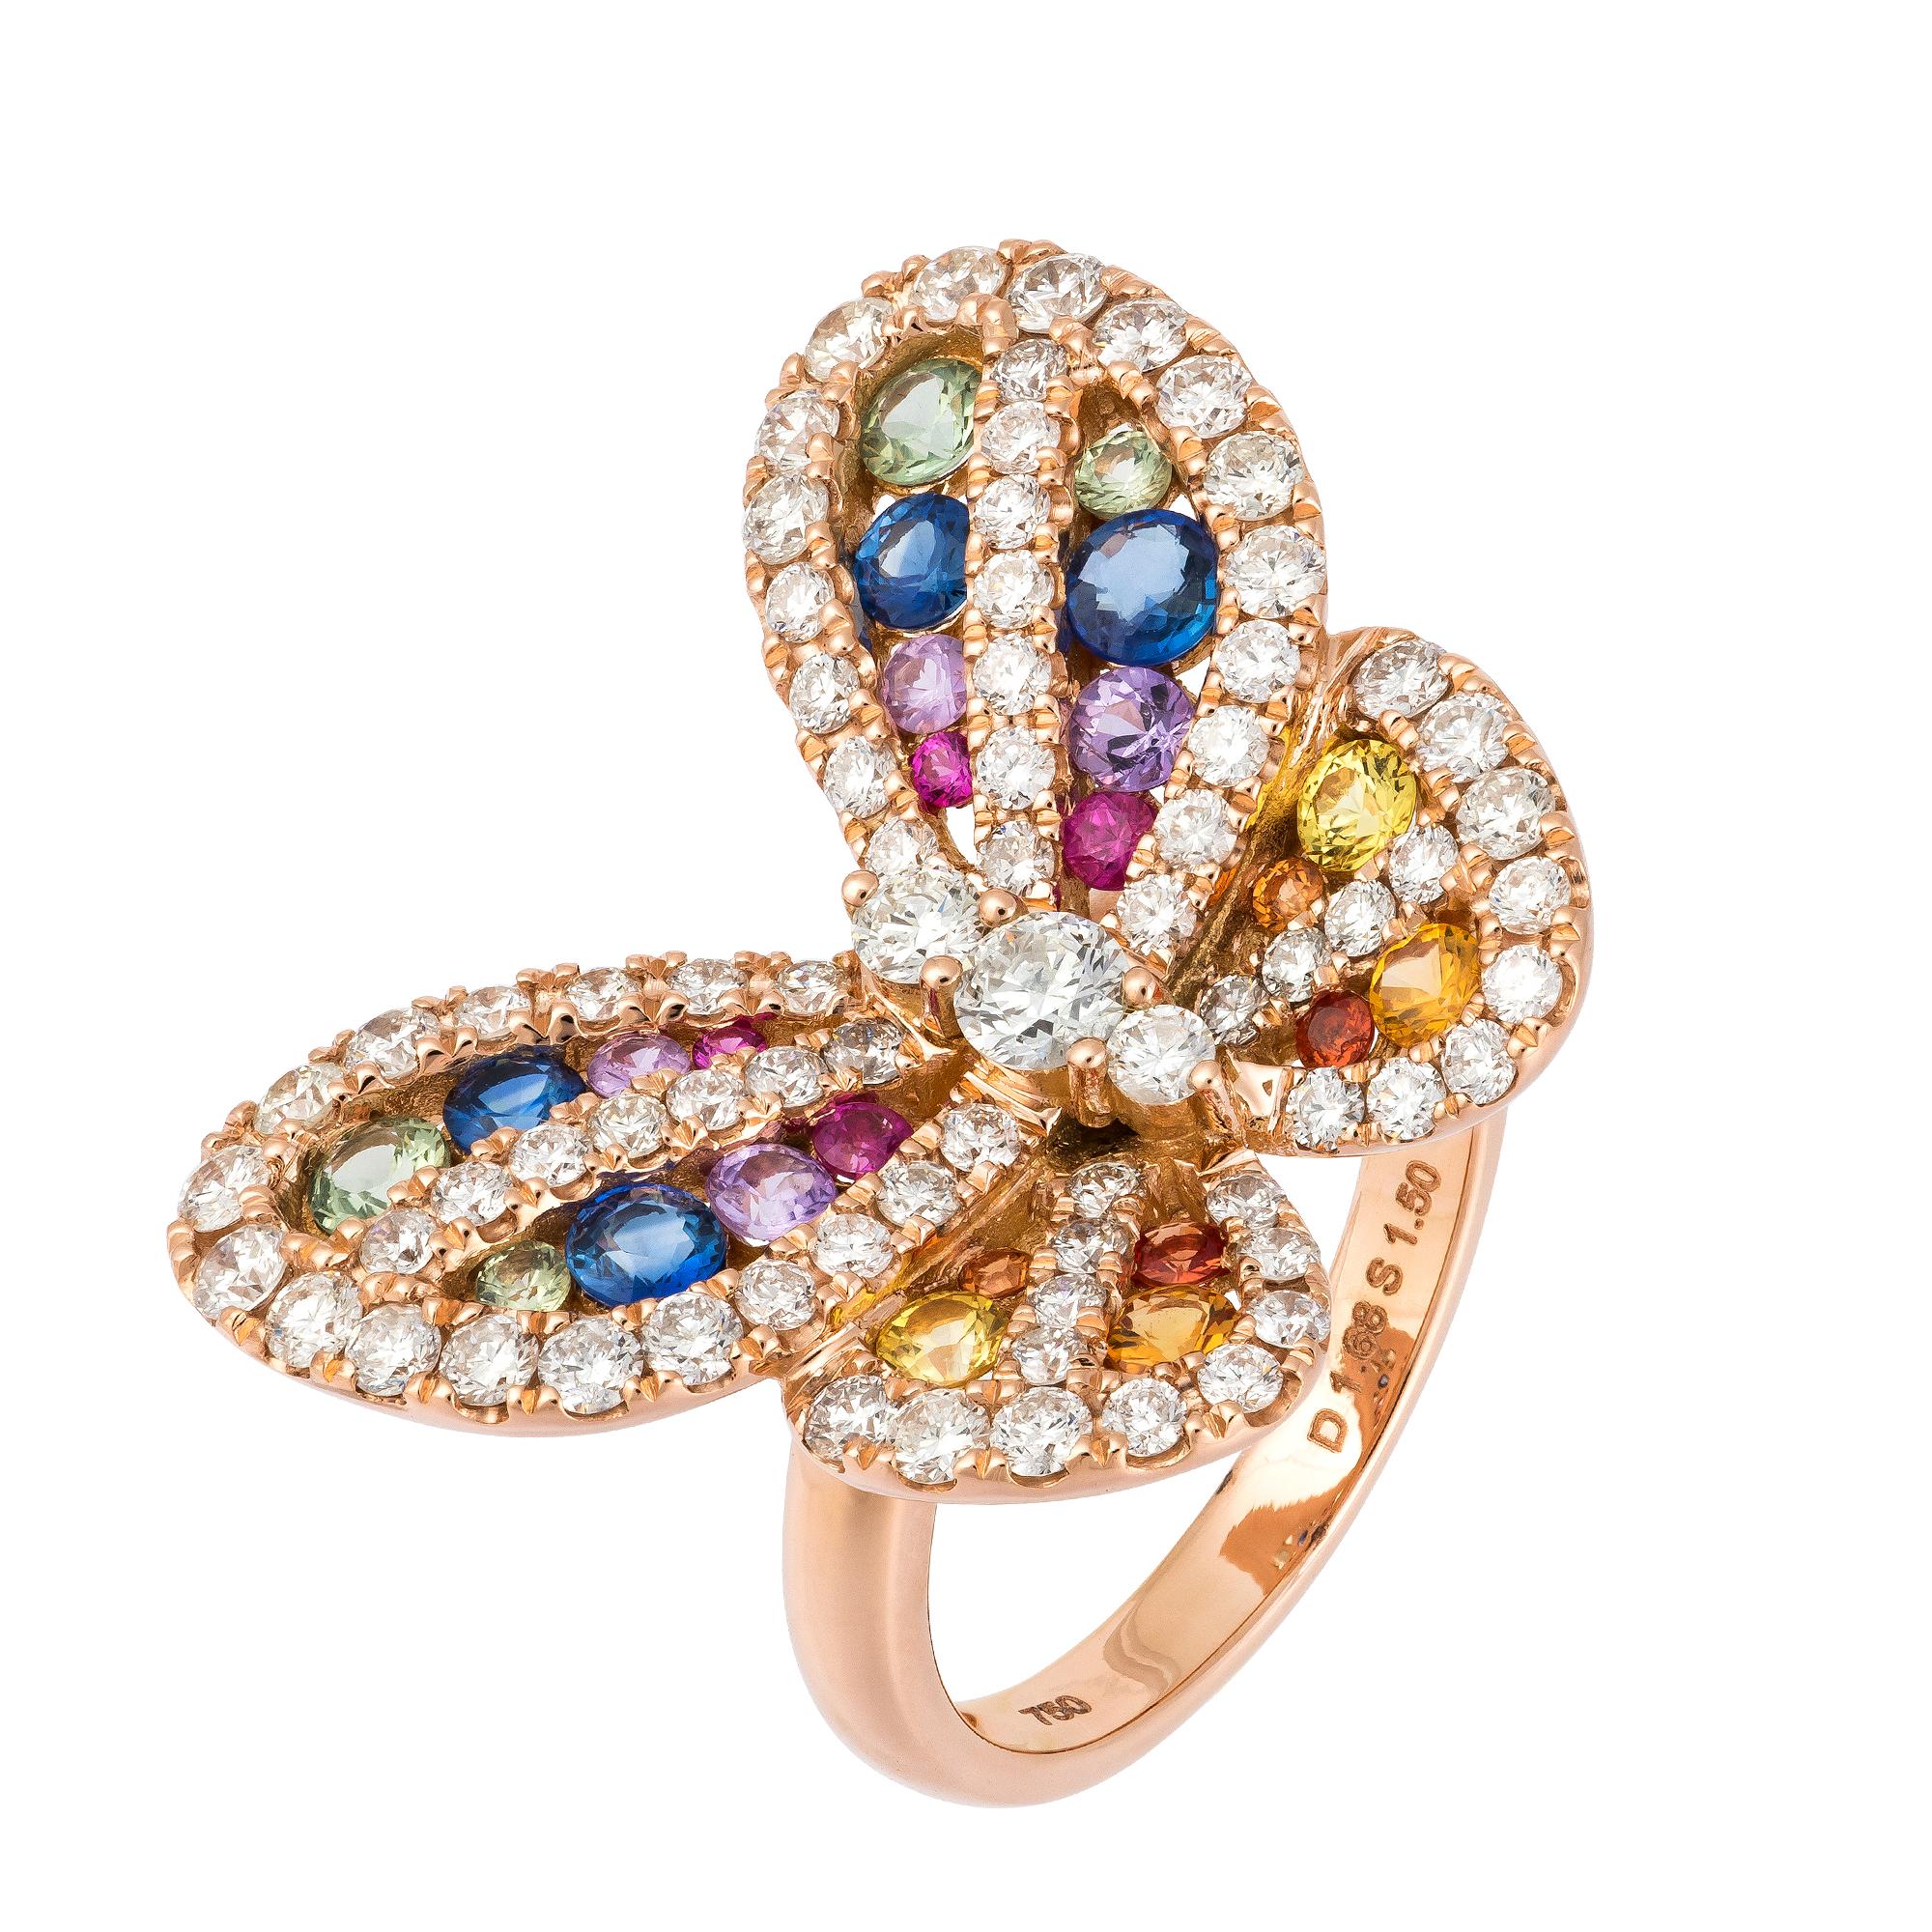 RING 18K Rose Gold Diamond 1.83 Cts/75 Pcs

Multi Sapphire 1.32 Cts/24 Pcs

With a heritage of ancient fine Swiss jewelry traditions, NATKINA is a Geneva based jewellery brand, which creates modern jewellery masterpieces suitable for every day